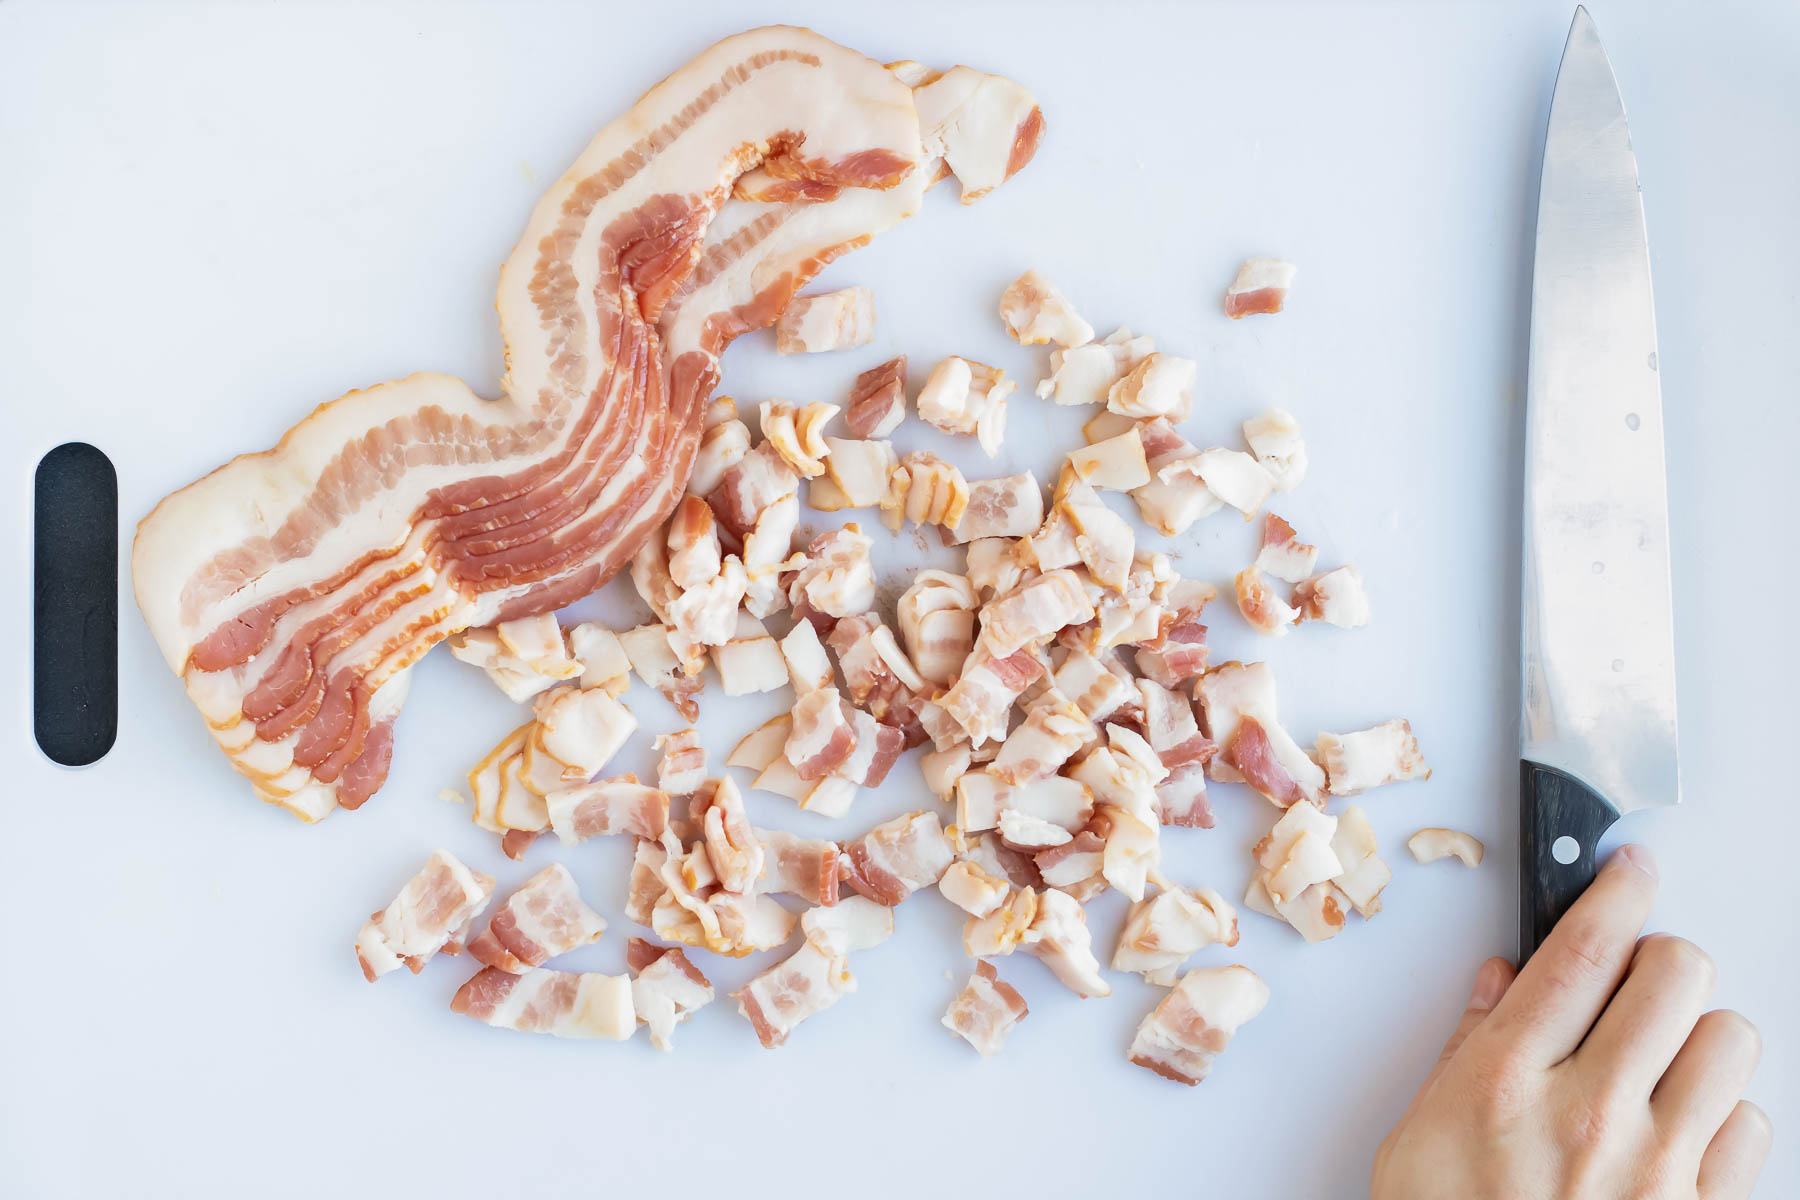 Bacon is sliced into small pieces.